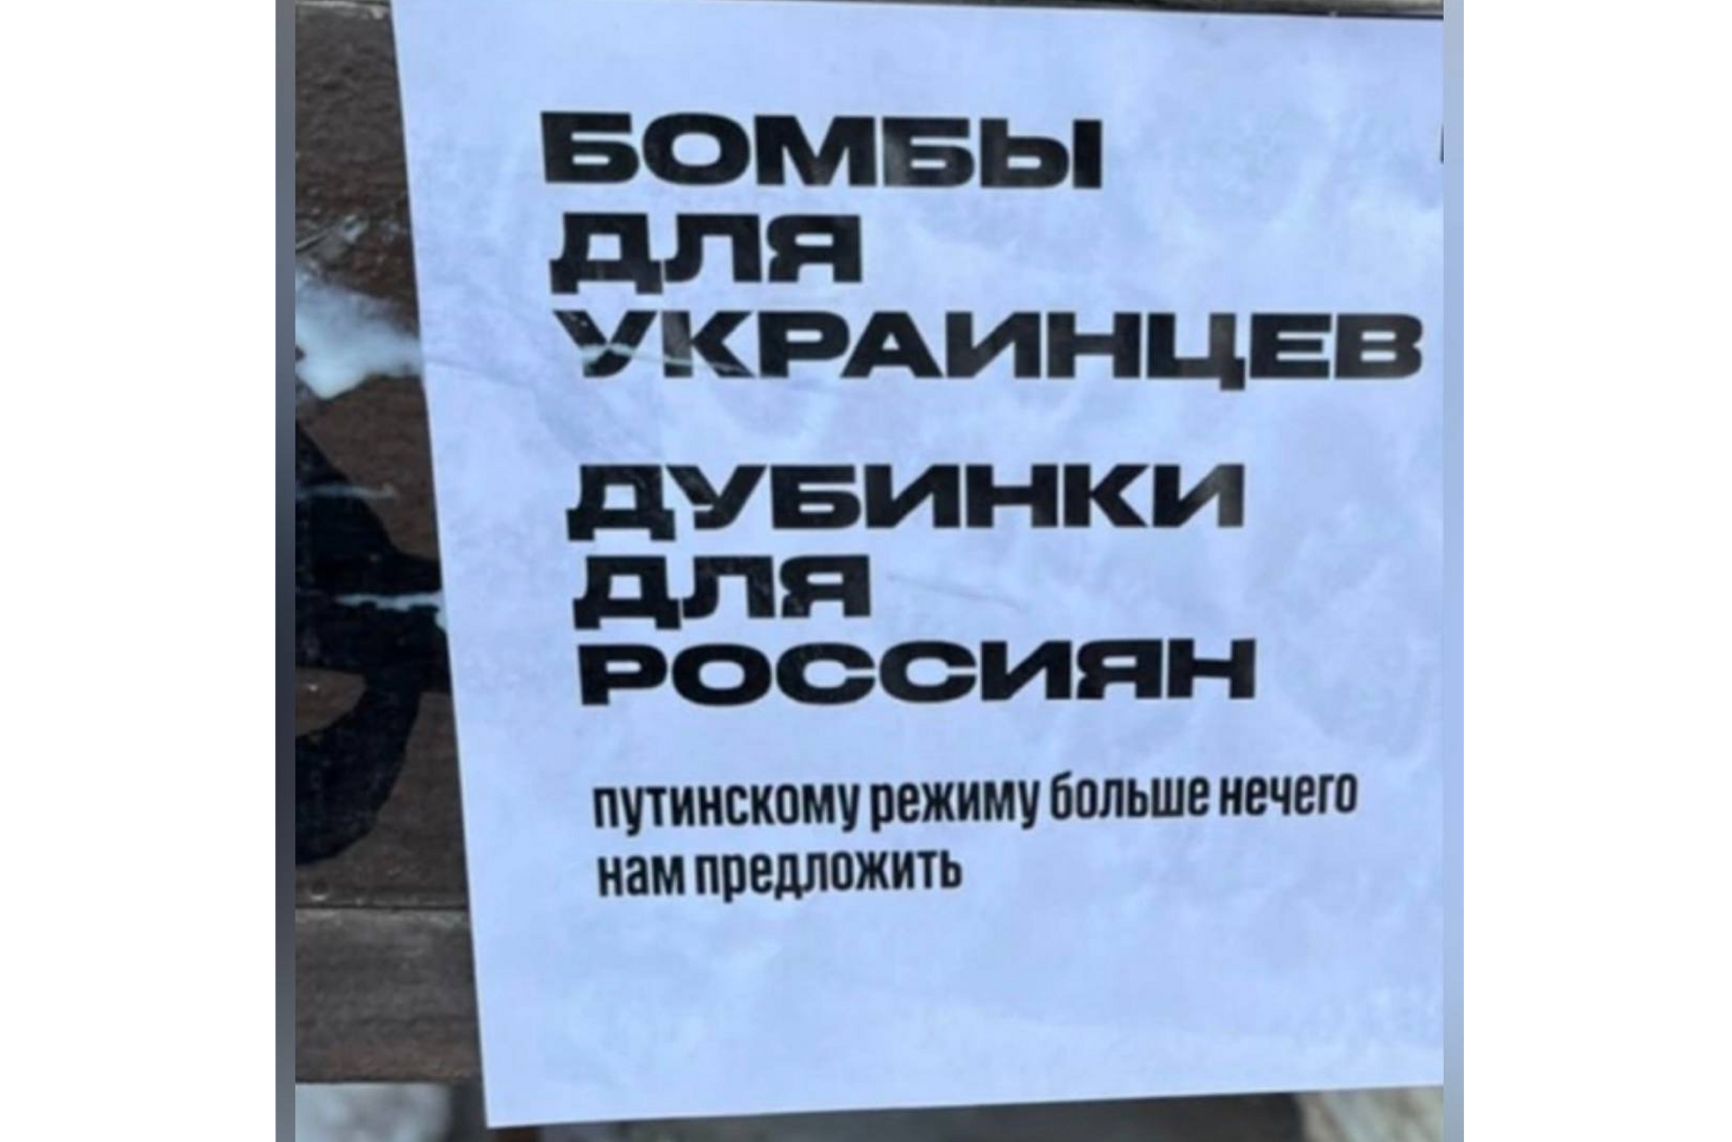 “Bombs for Ukrainians. Batons for Russians. That’s all Putin’s regime has to offer.”